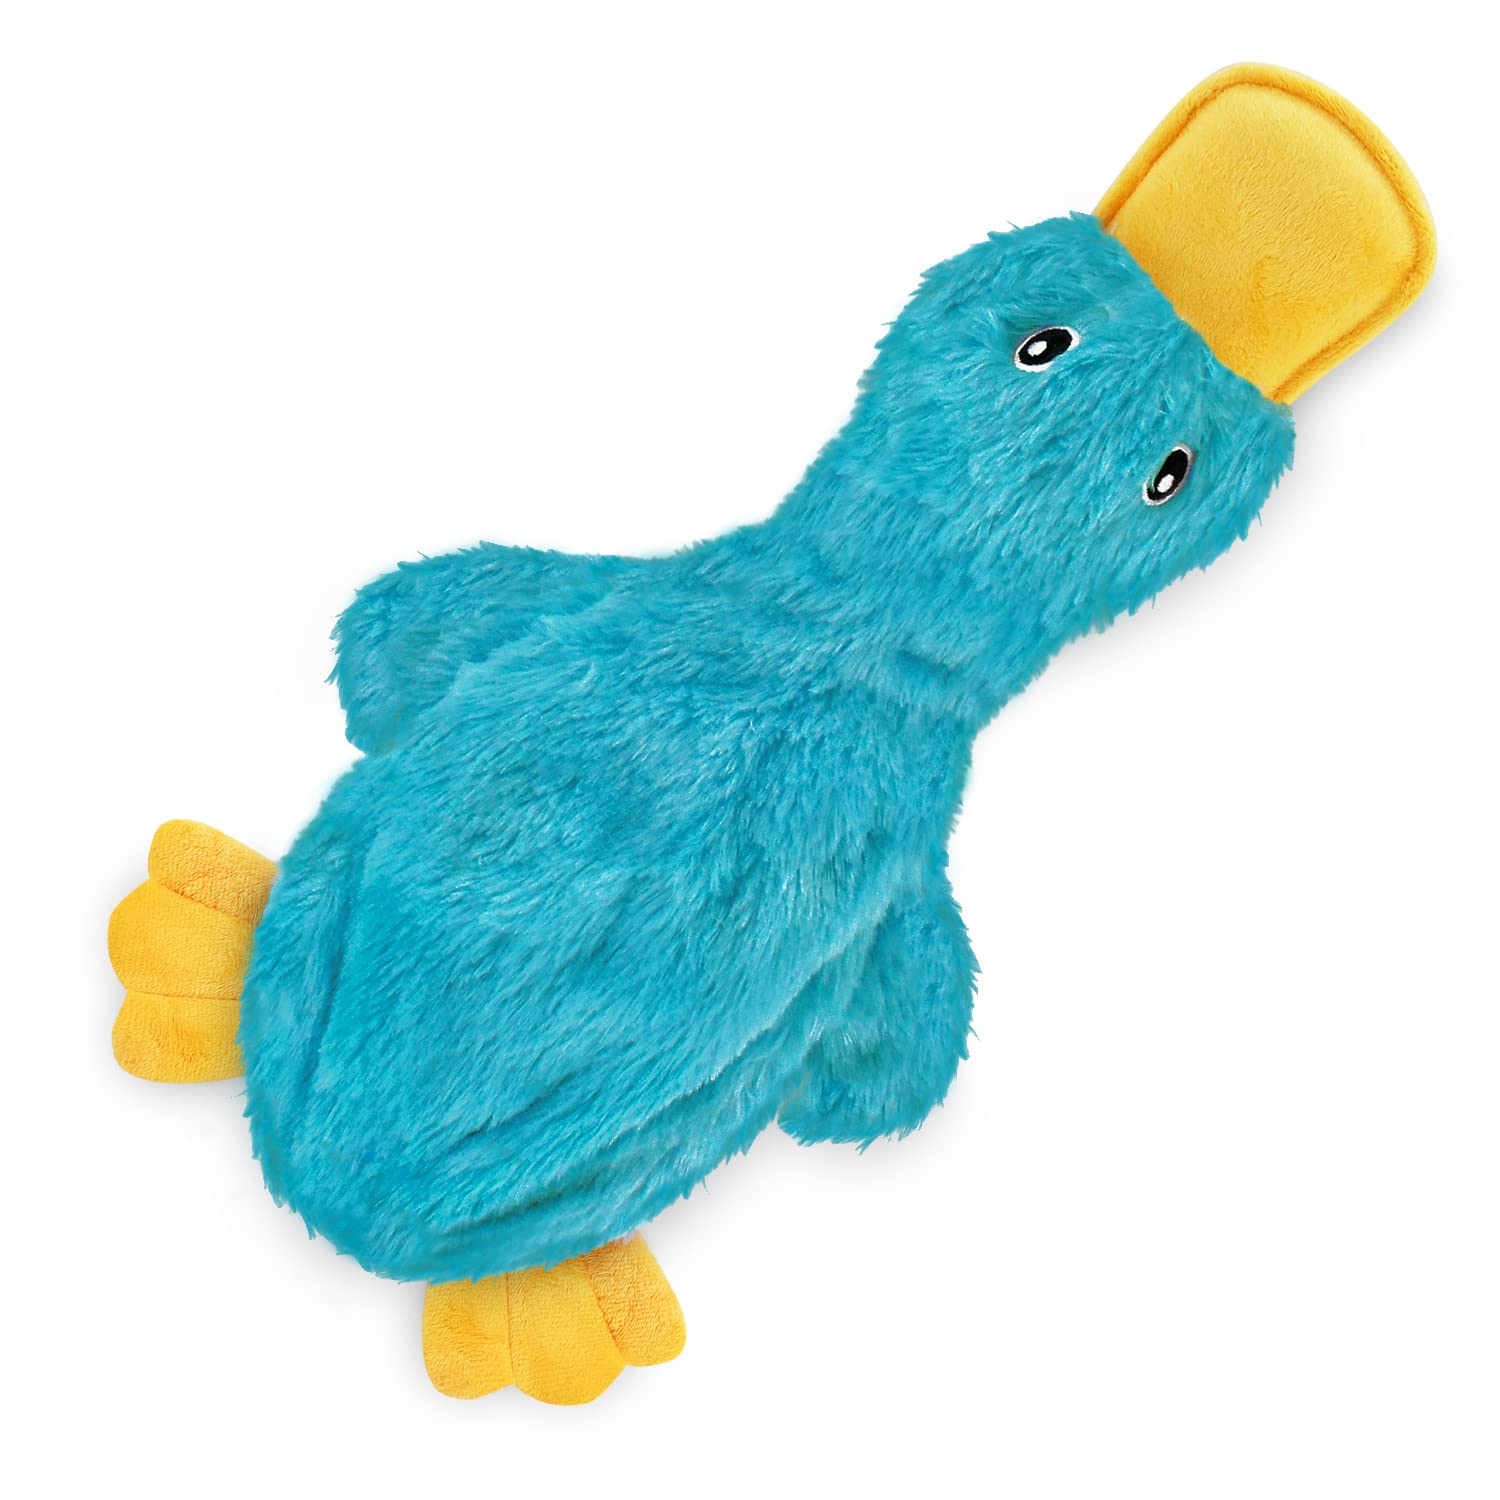 Best Pet Supplies Crinkle Dog Toy for Small, Medium, and Large Breeds, Cute No Stuffing Duck with Soft Squeaker - UK GEMS